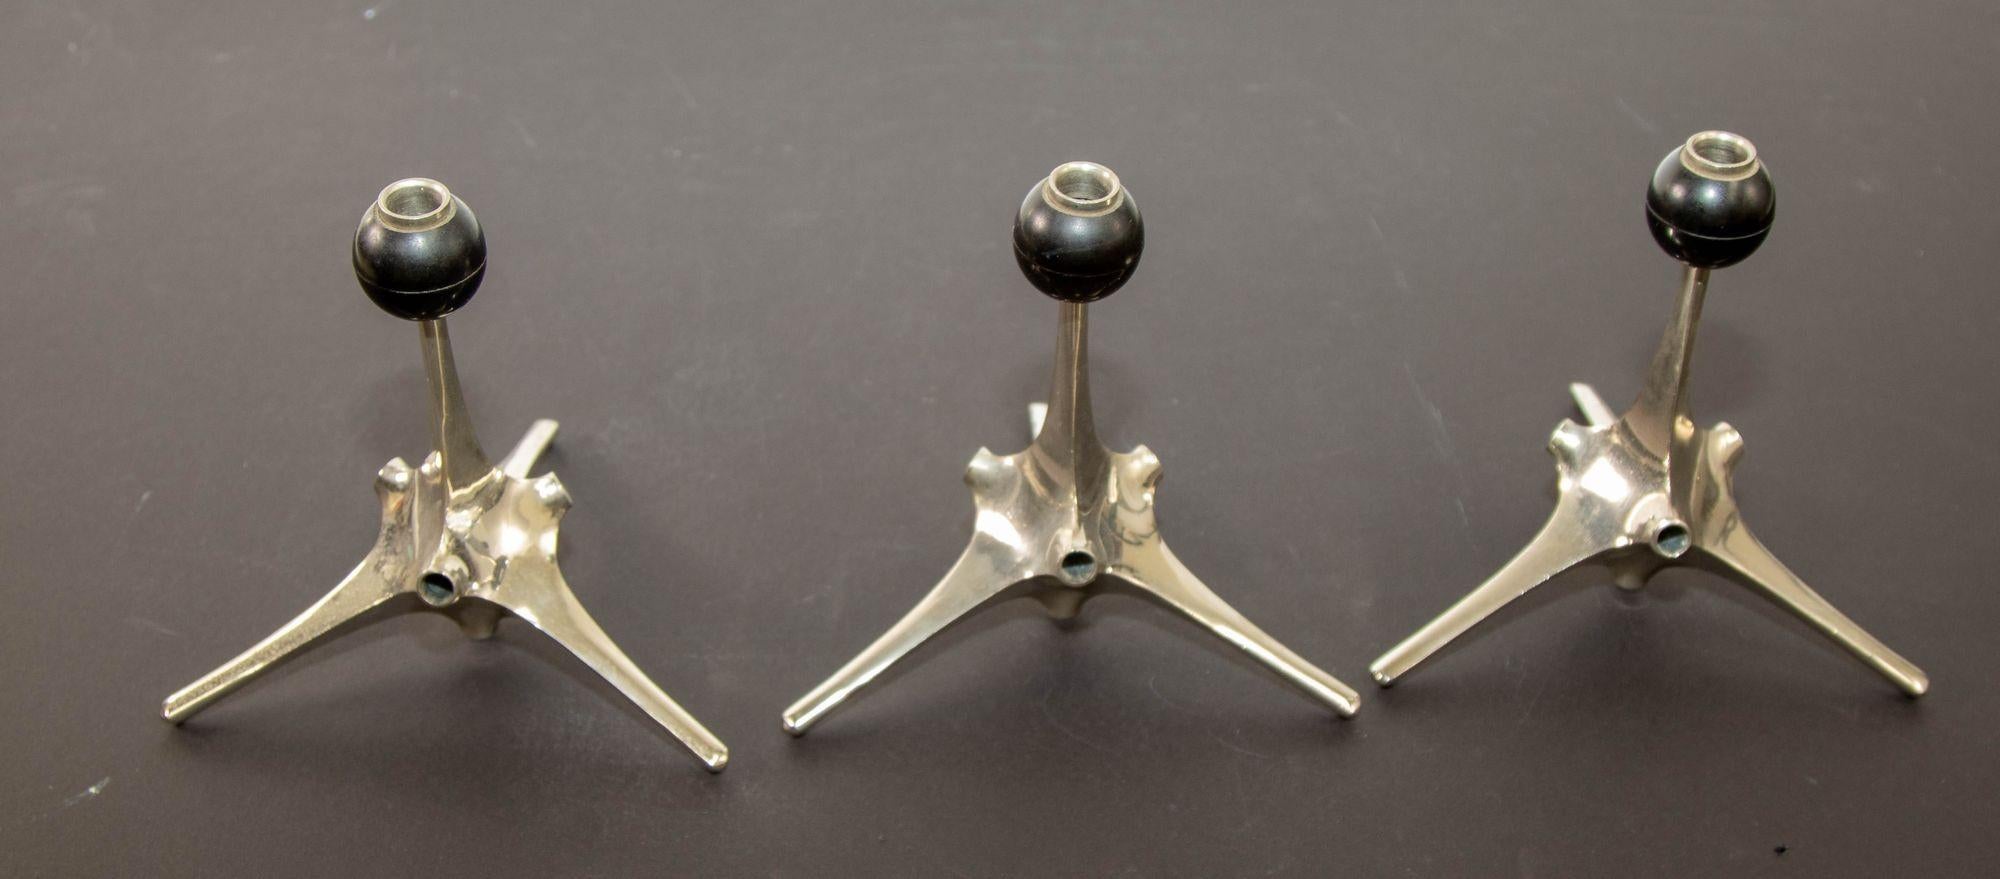 1960s Nagel Candle Holder, West Germany by Fritz Nagel and Caesar Stoffi.
Nagel candle holder, West Germany, polished nickel-plated.
Rare set of three Nagel-KG modular candle holders designed by Fritz Nagel and Caesar Stoffi for Nagel in the